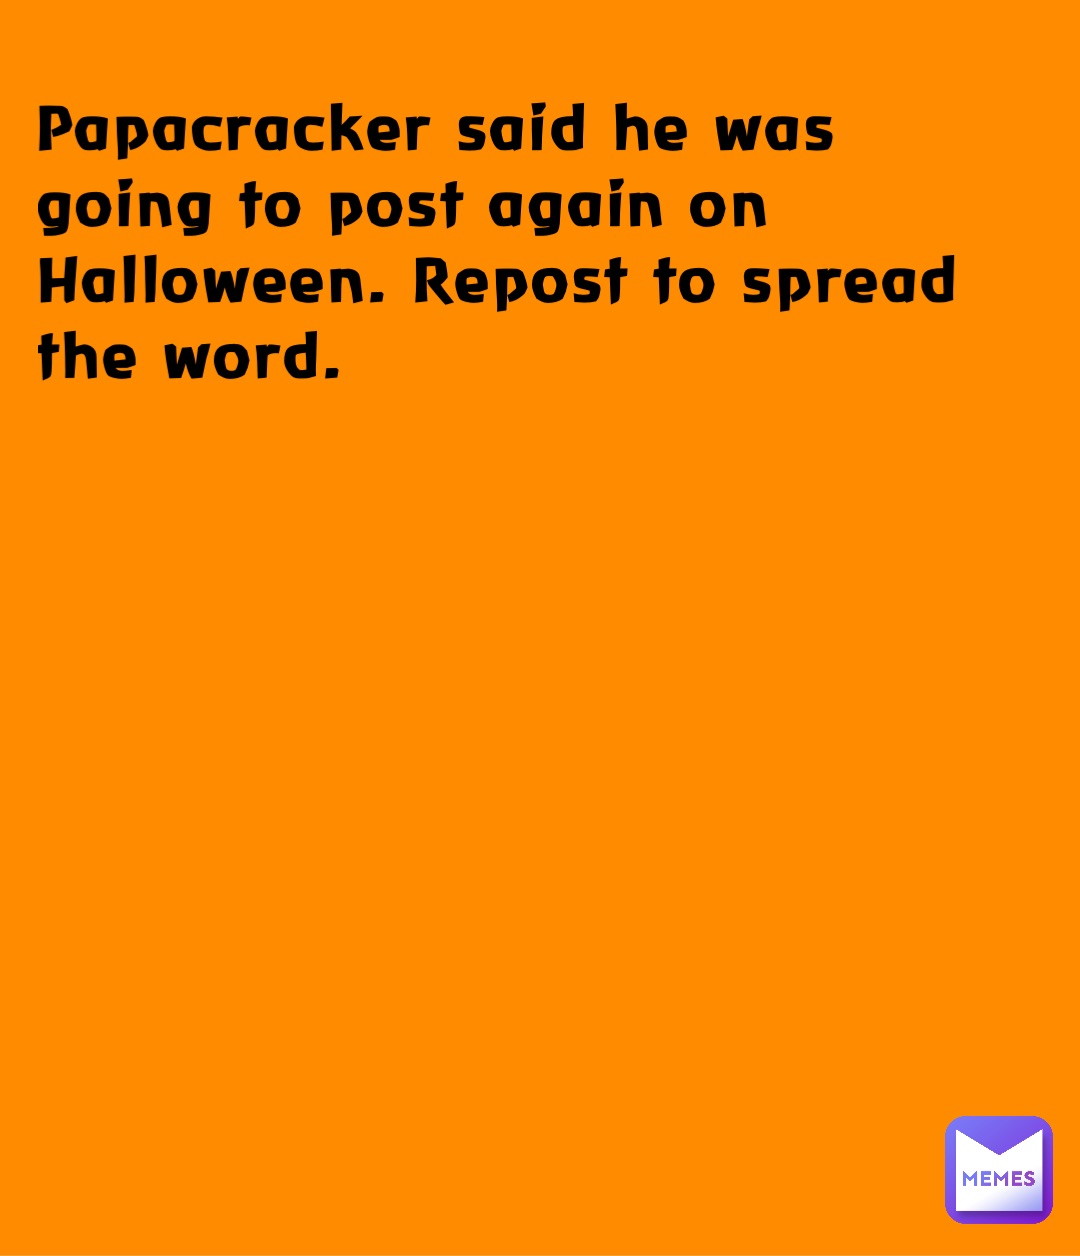 Papacracker said he was going to post again on Halloween. Repost to spread the word.